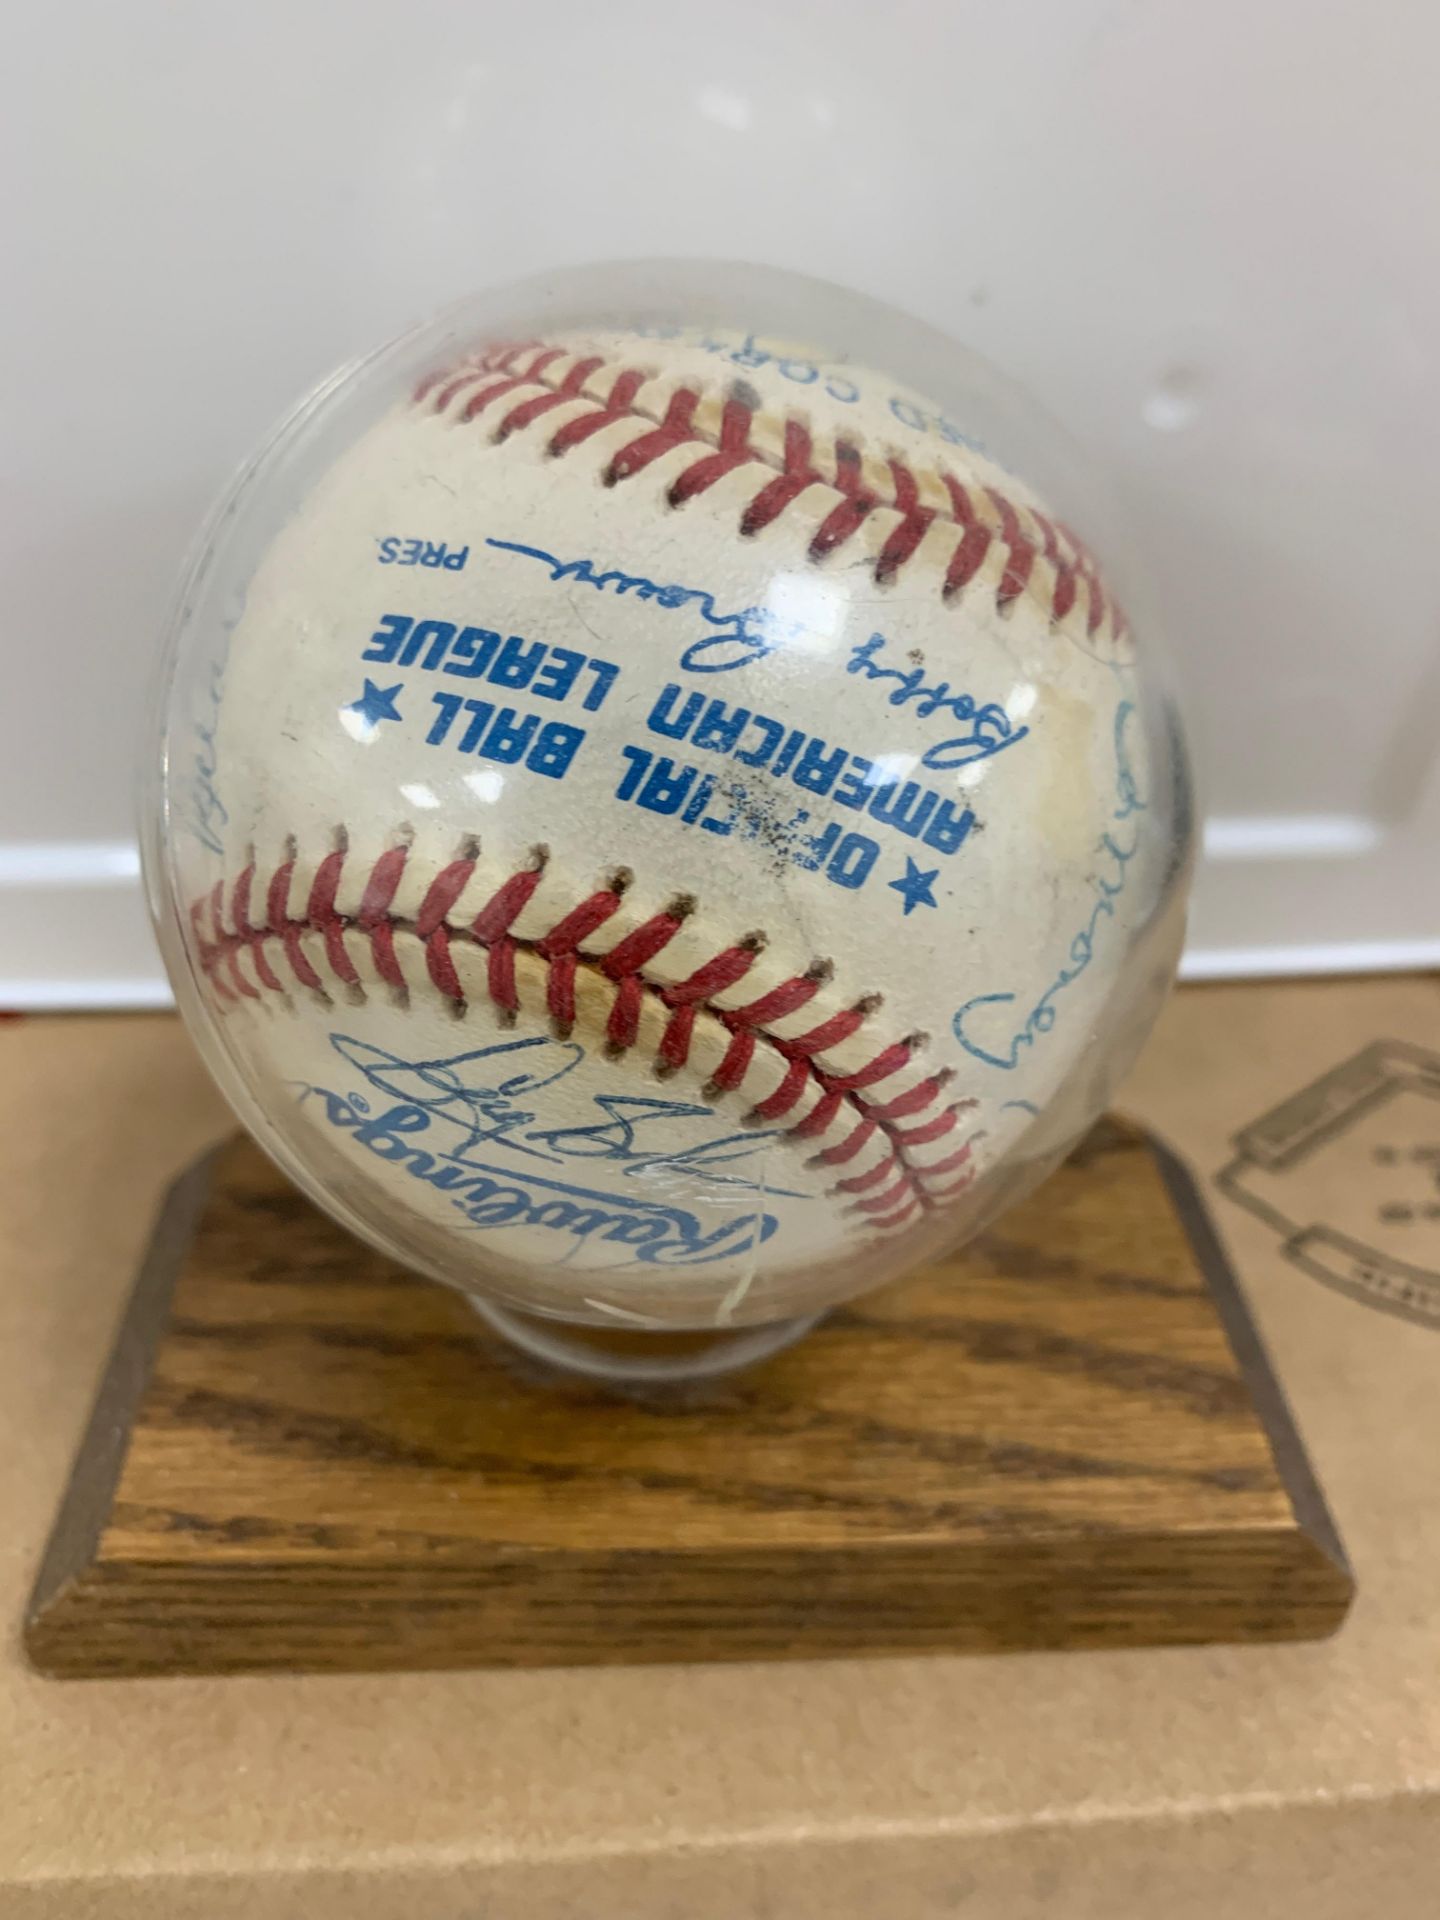 Signed Baseball by Milwaukee Braves Baseball Team, in Case and Stand - Image 4 of 5